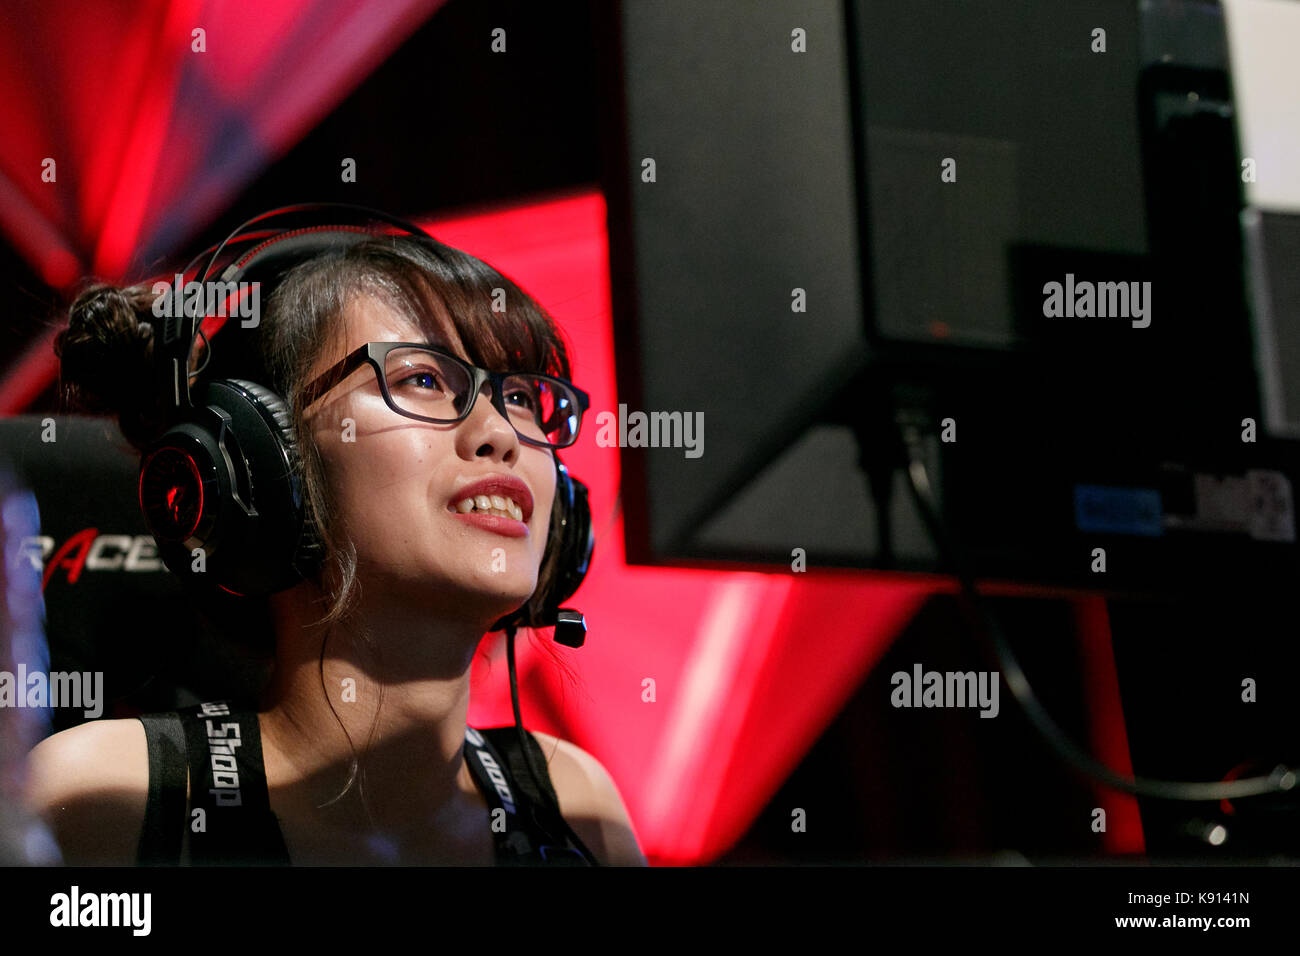 Chiba, Japan. 21st Sep, 2017. An E-Sports player competes during the Tokyo Game Show (TGS 2017) on September 21, 2017, Chiba, Japan. This year's event hosts 609 companies from 36 different countries, introducing 1,317 video game titles for smartphones, games consoles, VR, AR and MR platforms. The show, which expects to attract 250,000 visitors, runs until September 24 at the International Convention Complex Makuhari Messe in Chiba; and will be streamed live around the world. Credit: Rodrigo Reyes Marin/AFLO/Alamy Live News Stock Photo